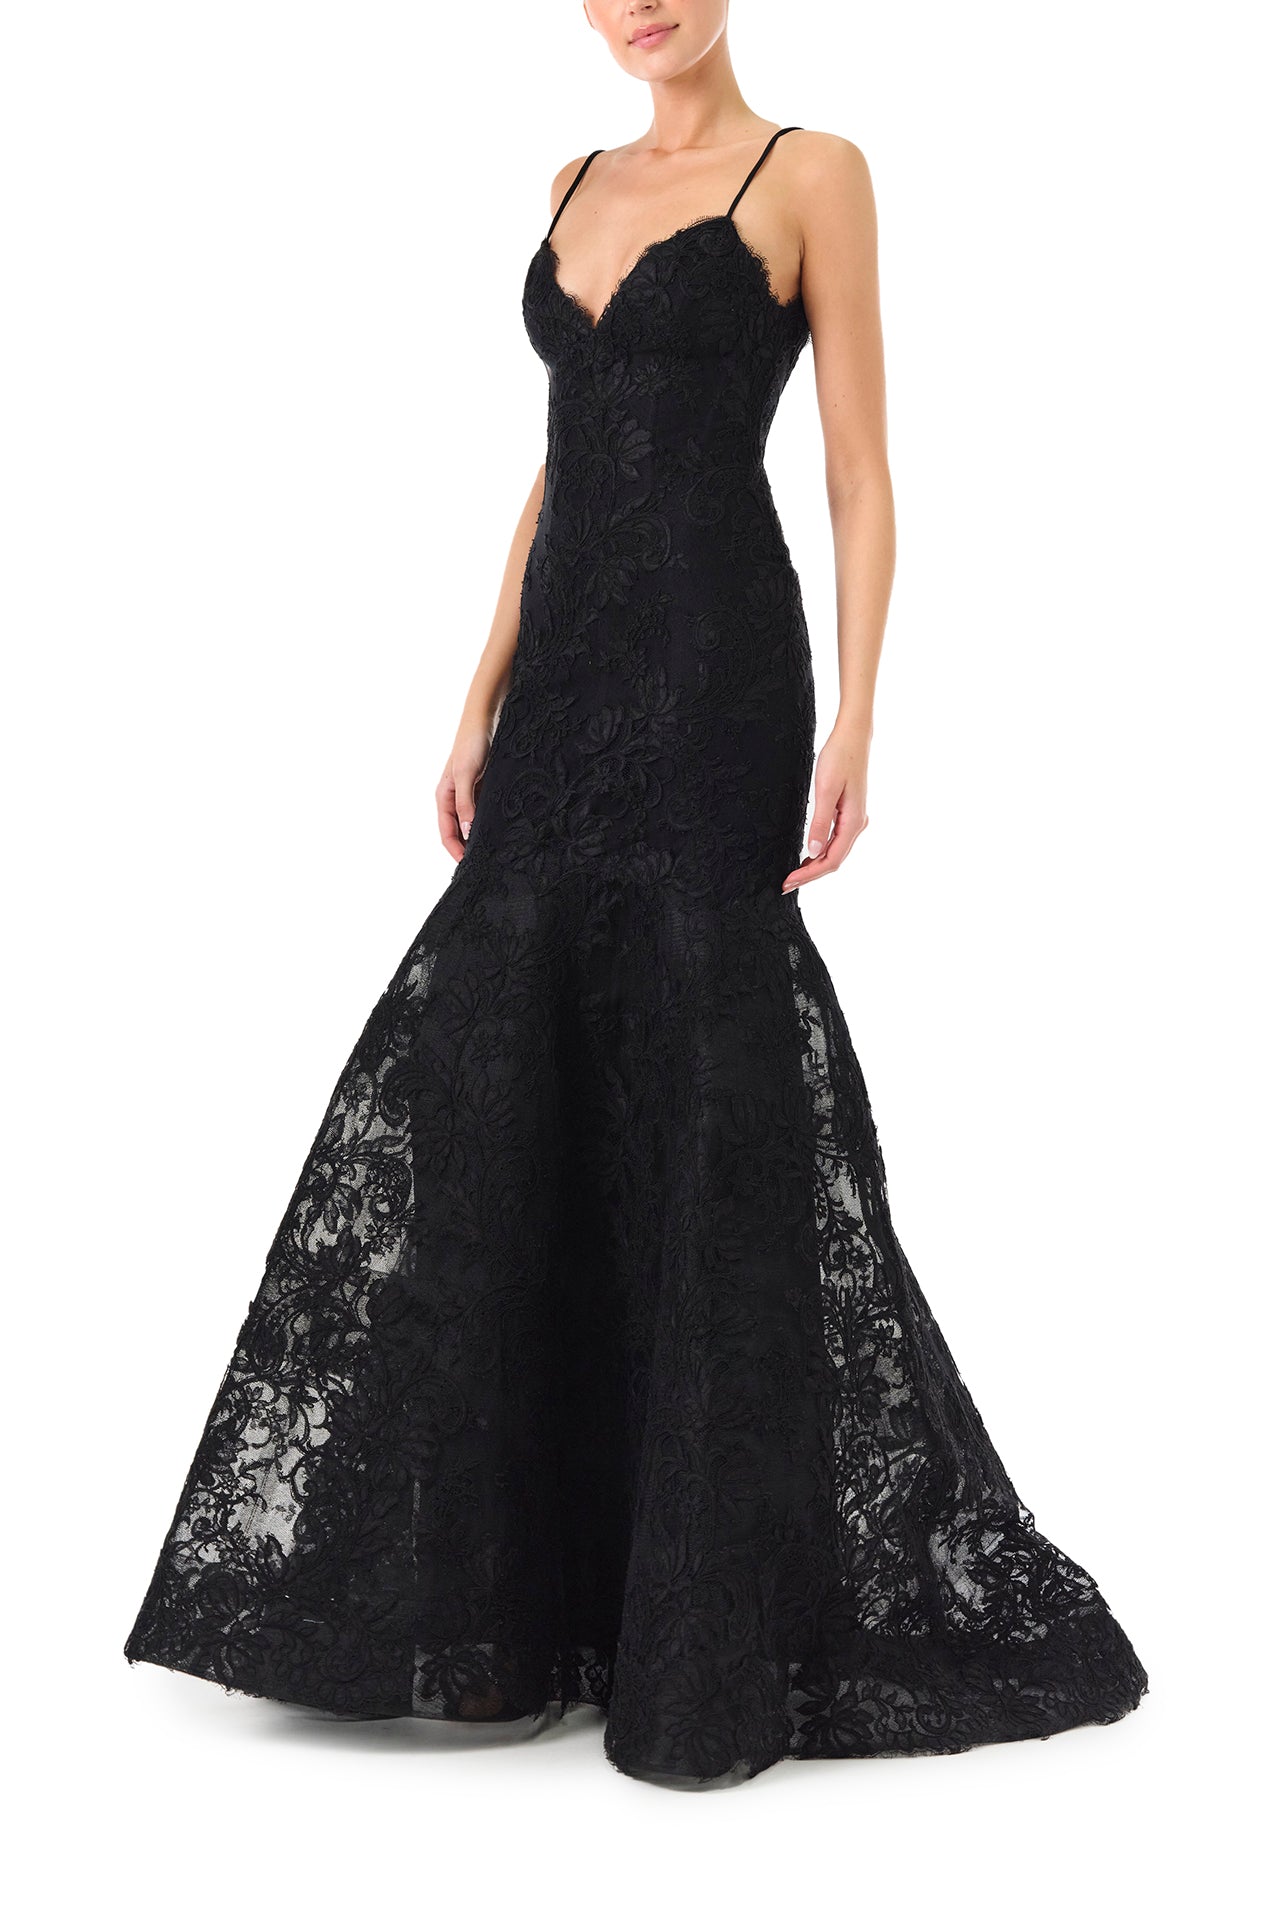 Monique Lhuillier Fall 2024 black lace, off-the-shoulder, draped gown with soft v-neck, spaghetti straps and caged trumpet skirt - left side.